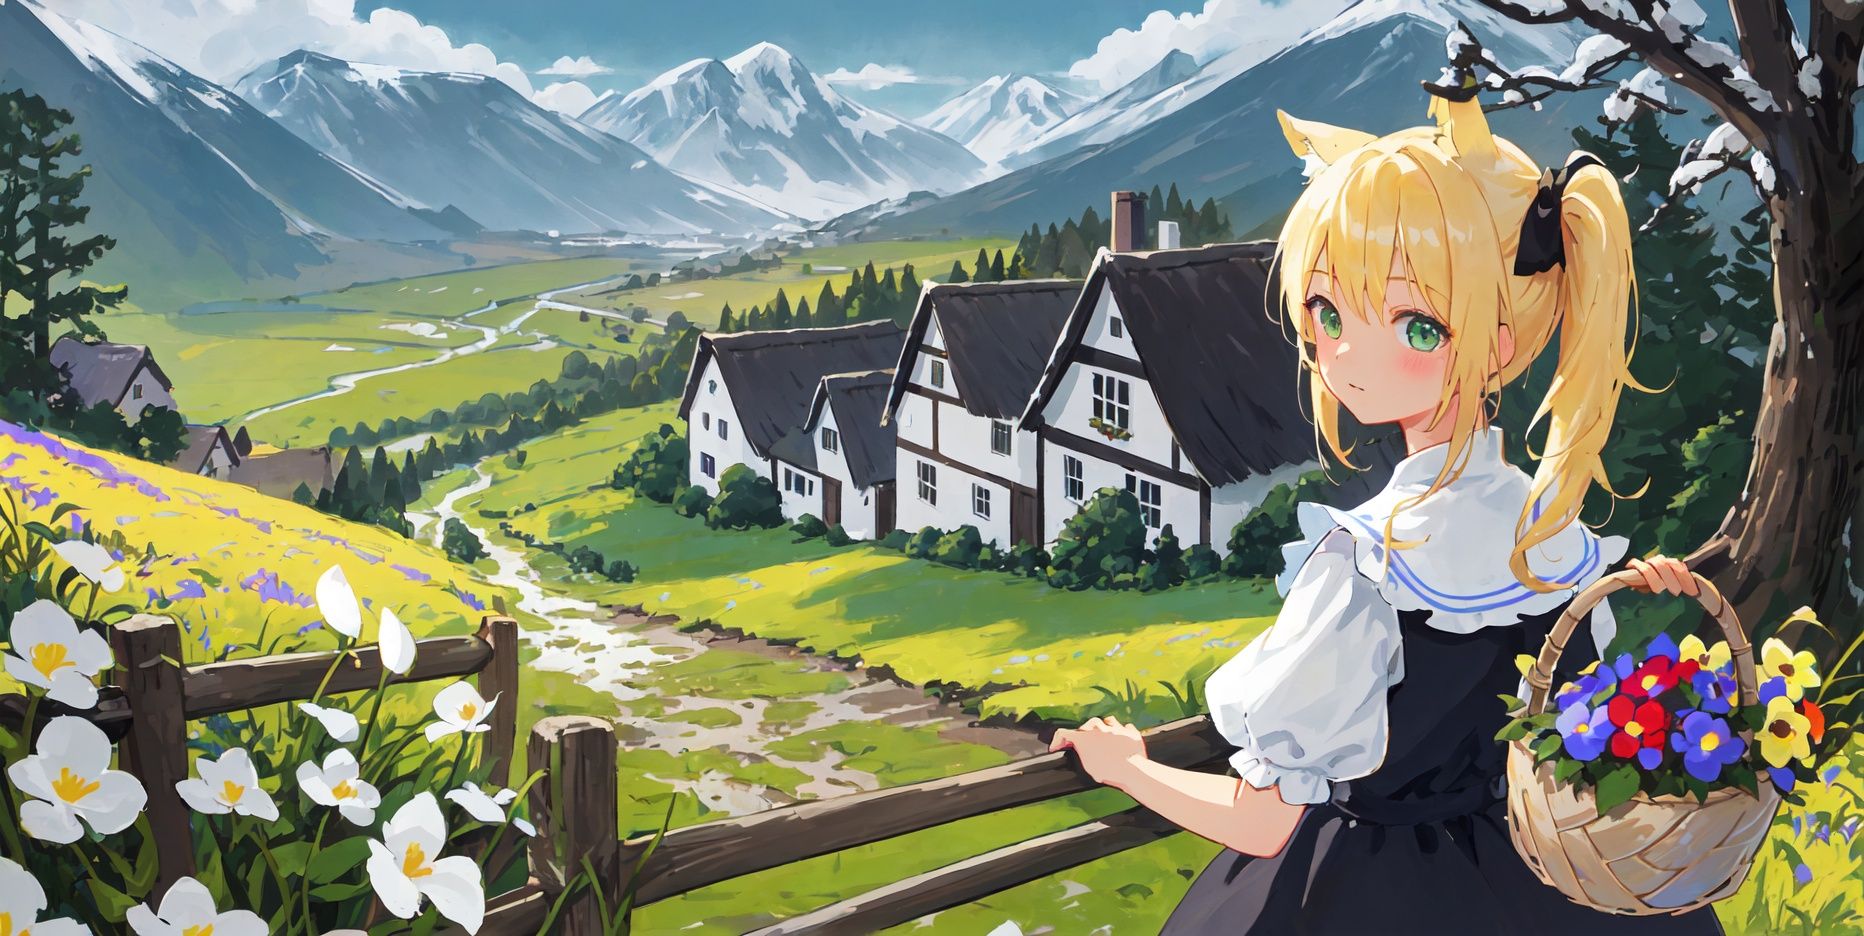 Rich details, illustrations,((1Girl)), ((close-up shot:2)),((Character color stroke.1.8))Thatched houses, muddy roads, mountains, grass, colorful flowers, trees, moss,Grass, snowWhite silk, maid dress, double horsetail, cat ear, cat tailWith a basket in hand,Blond HairLook to the right